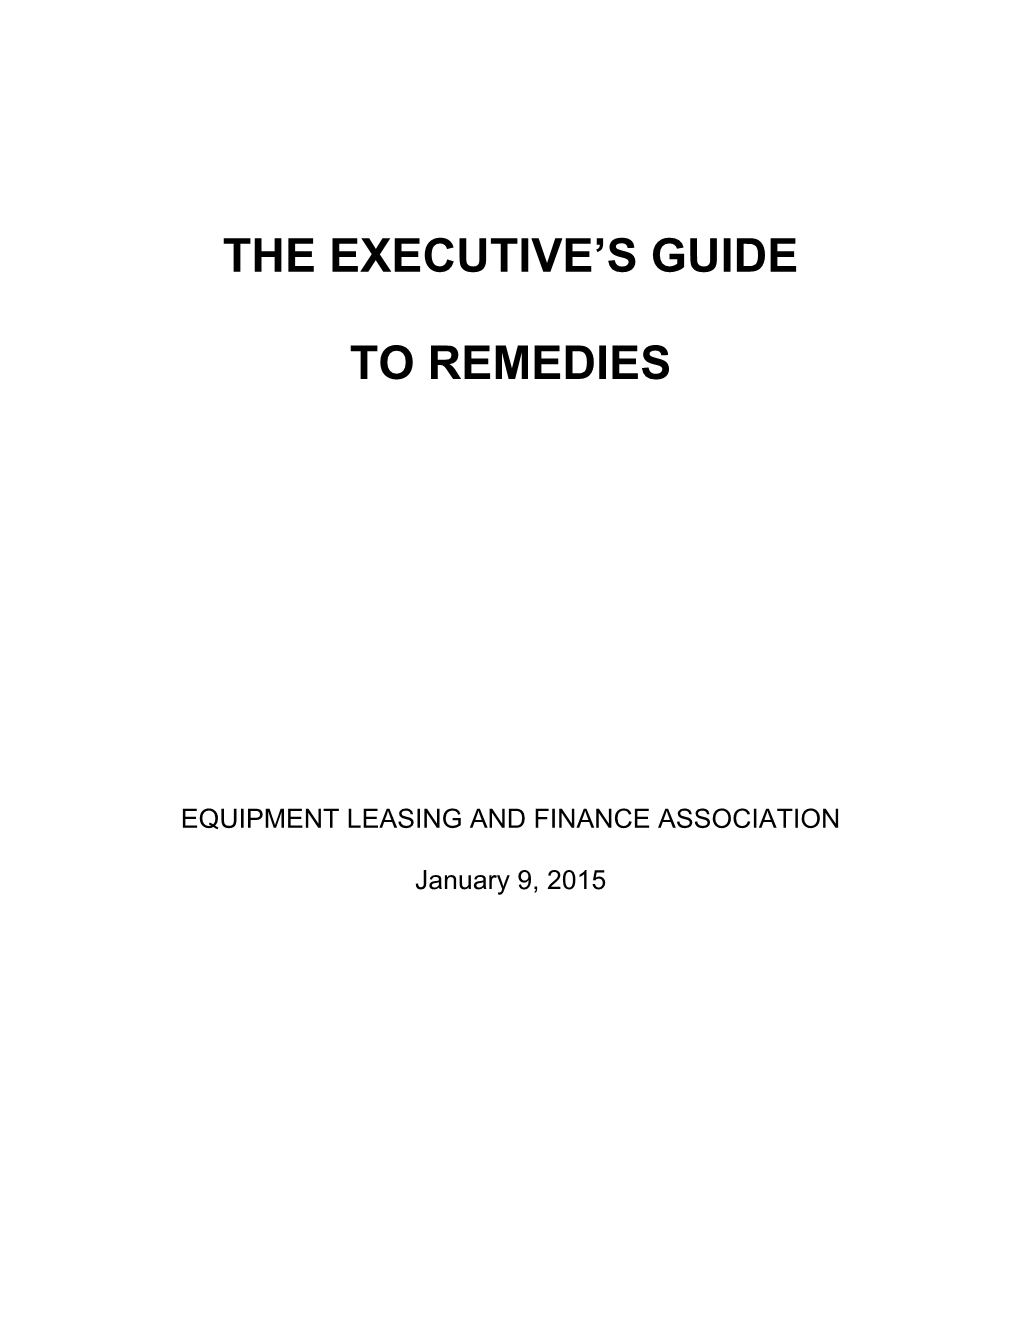 The Executive's Guide to Remedies